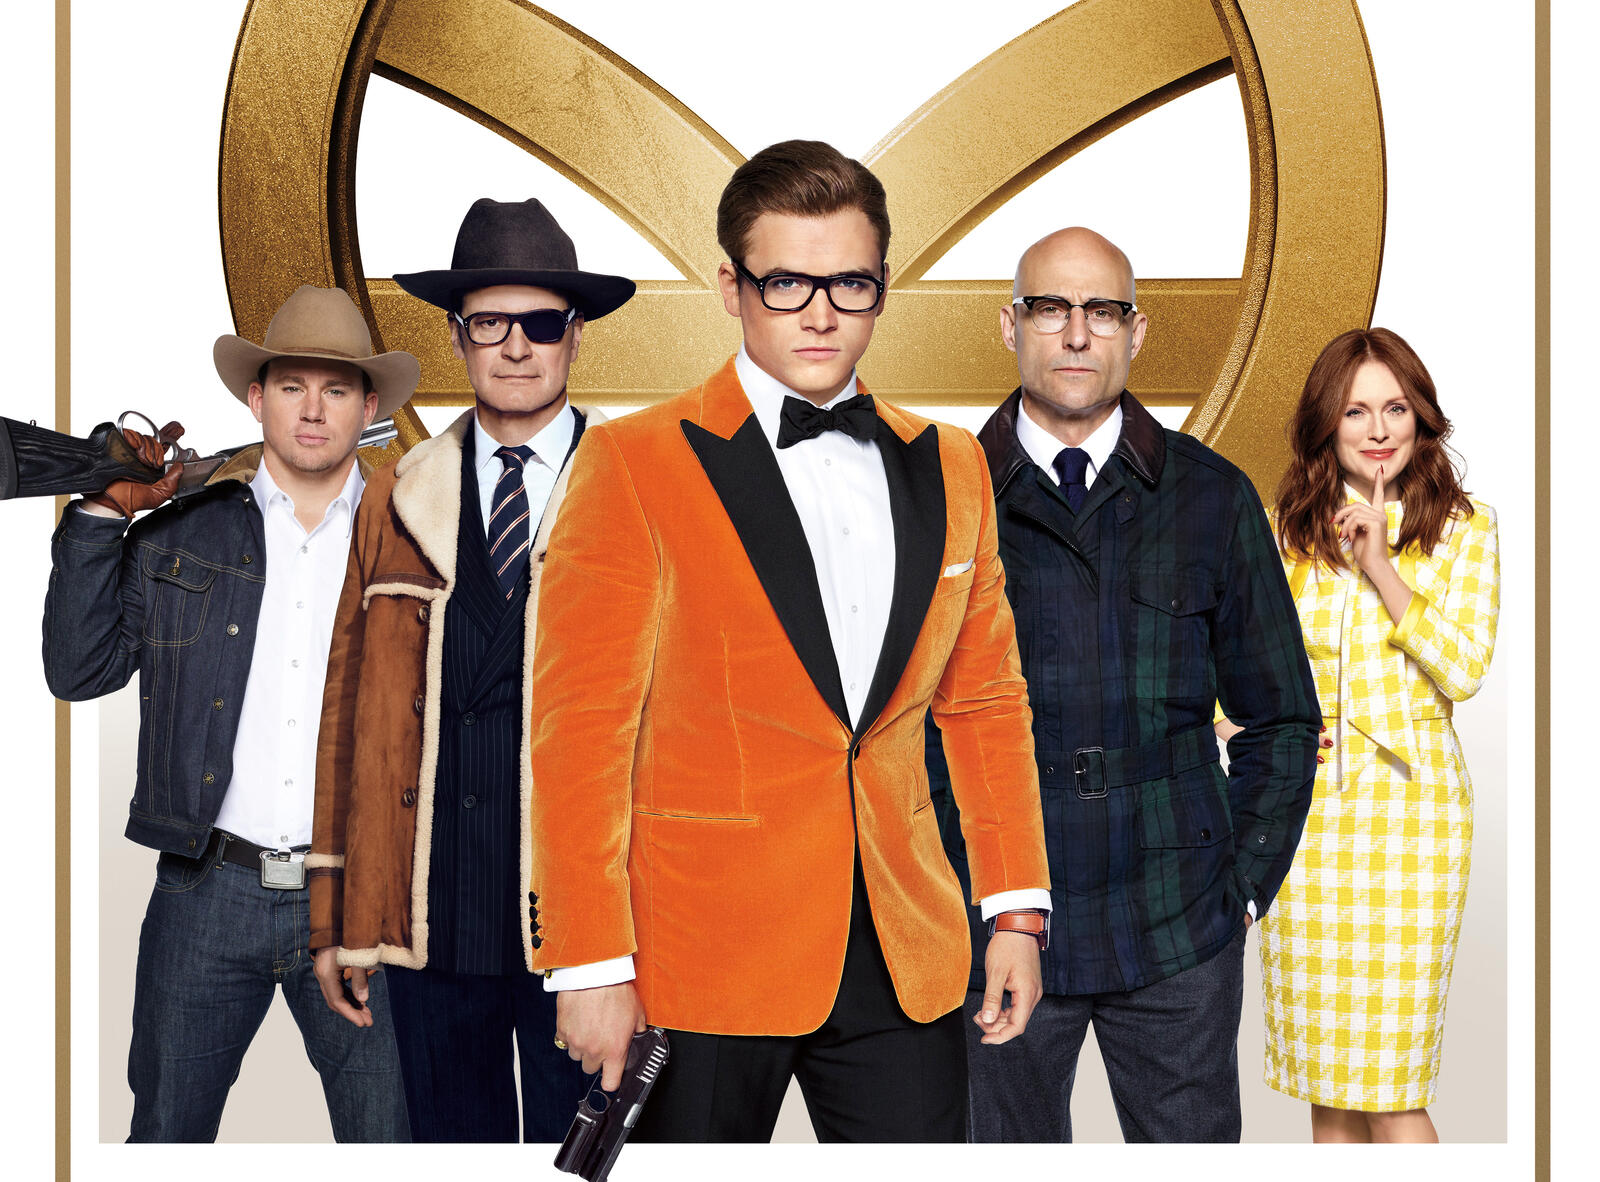 Wallpapers movies 2017 Movies kingsman the golden circle on the desktop